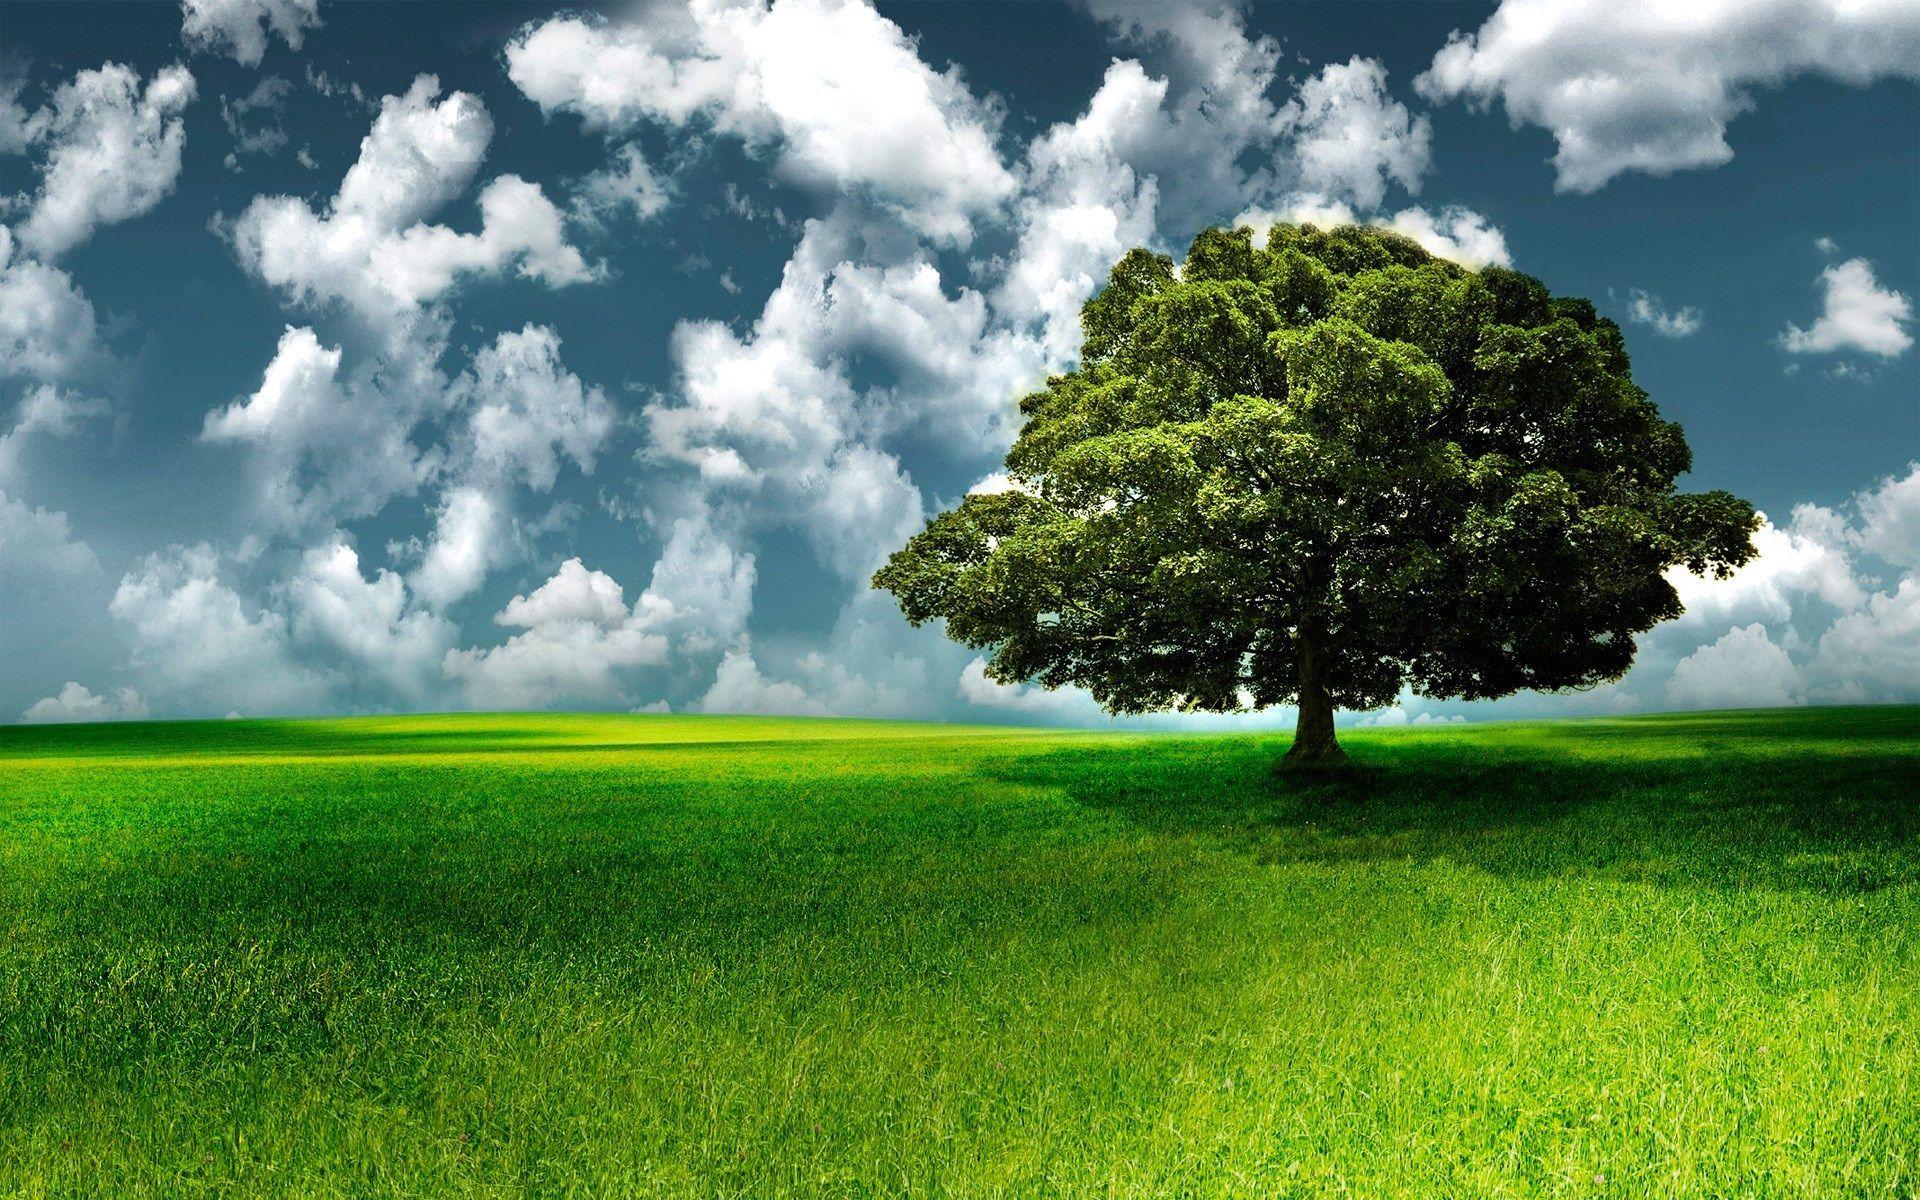 Another Asus Transformer Tree  Live  Live tree HD wallpaper  Pxfuel